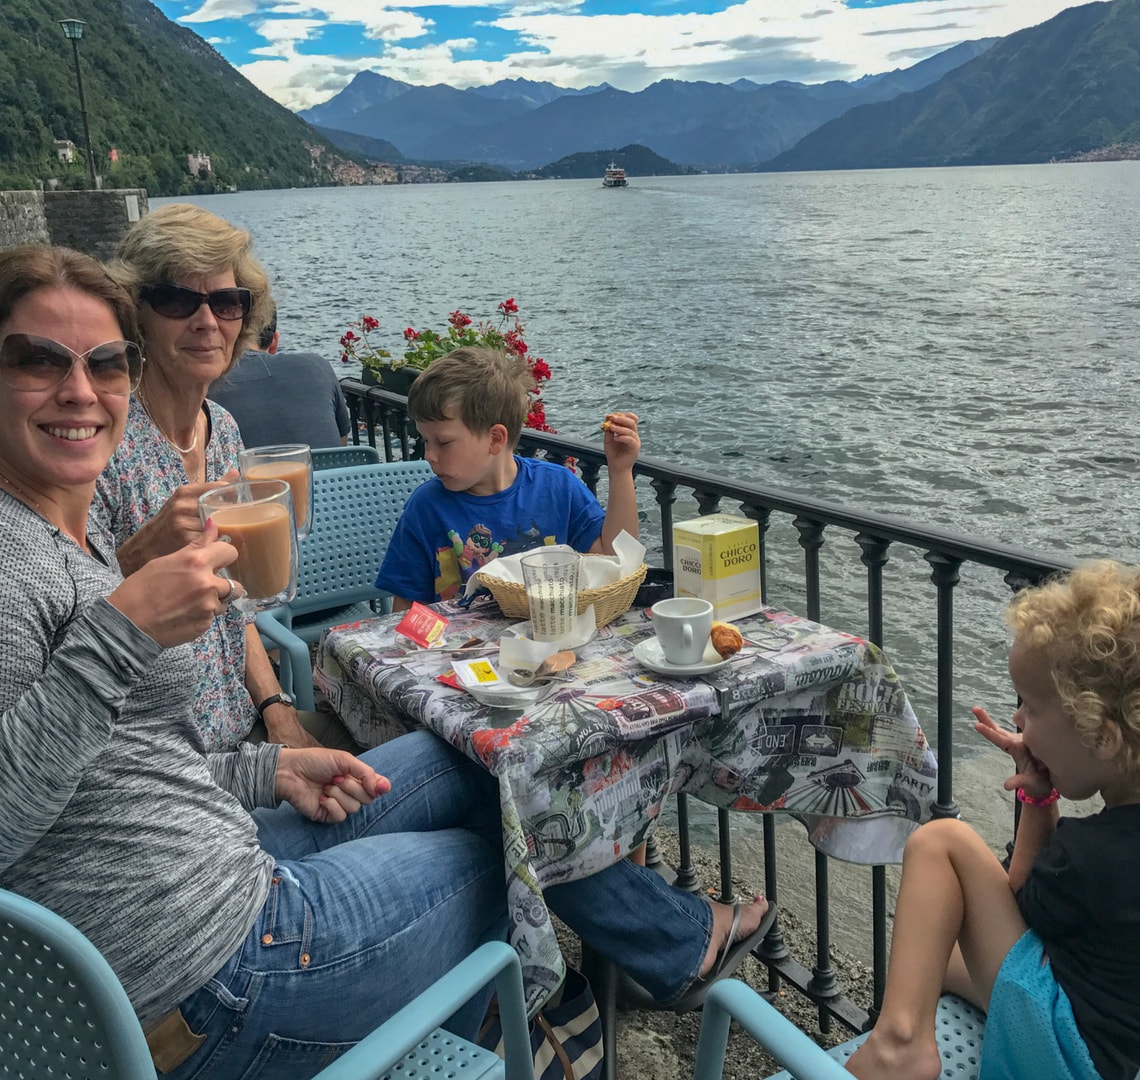 2017 - A Summary of an Absolutely Incredible Year of Holidays! - Wanderlust Family with Granny Wanderlust Having Tea and Breakfast with Granny Wanderlust on Lake Como